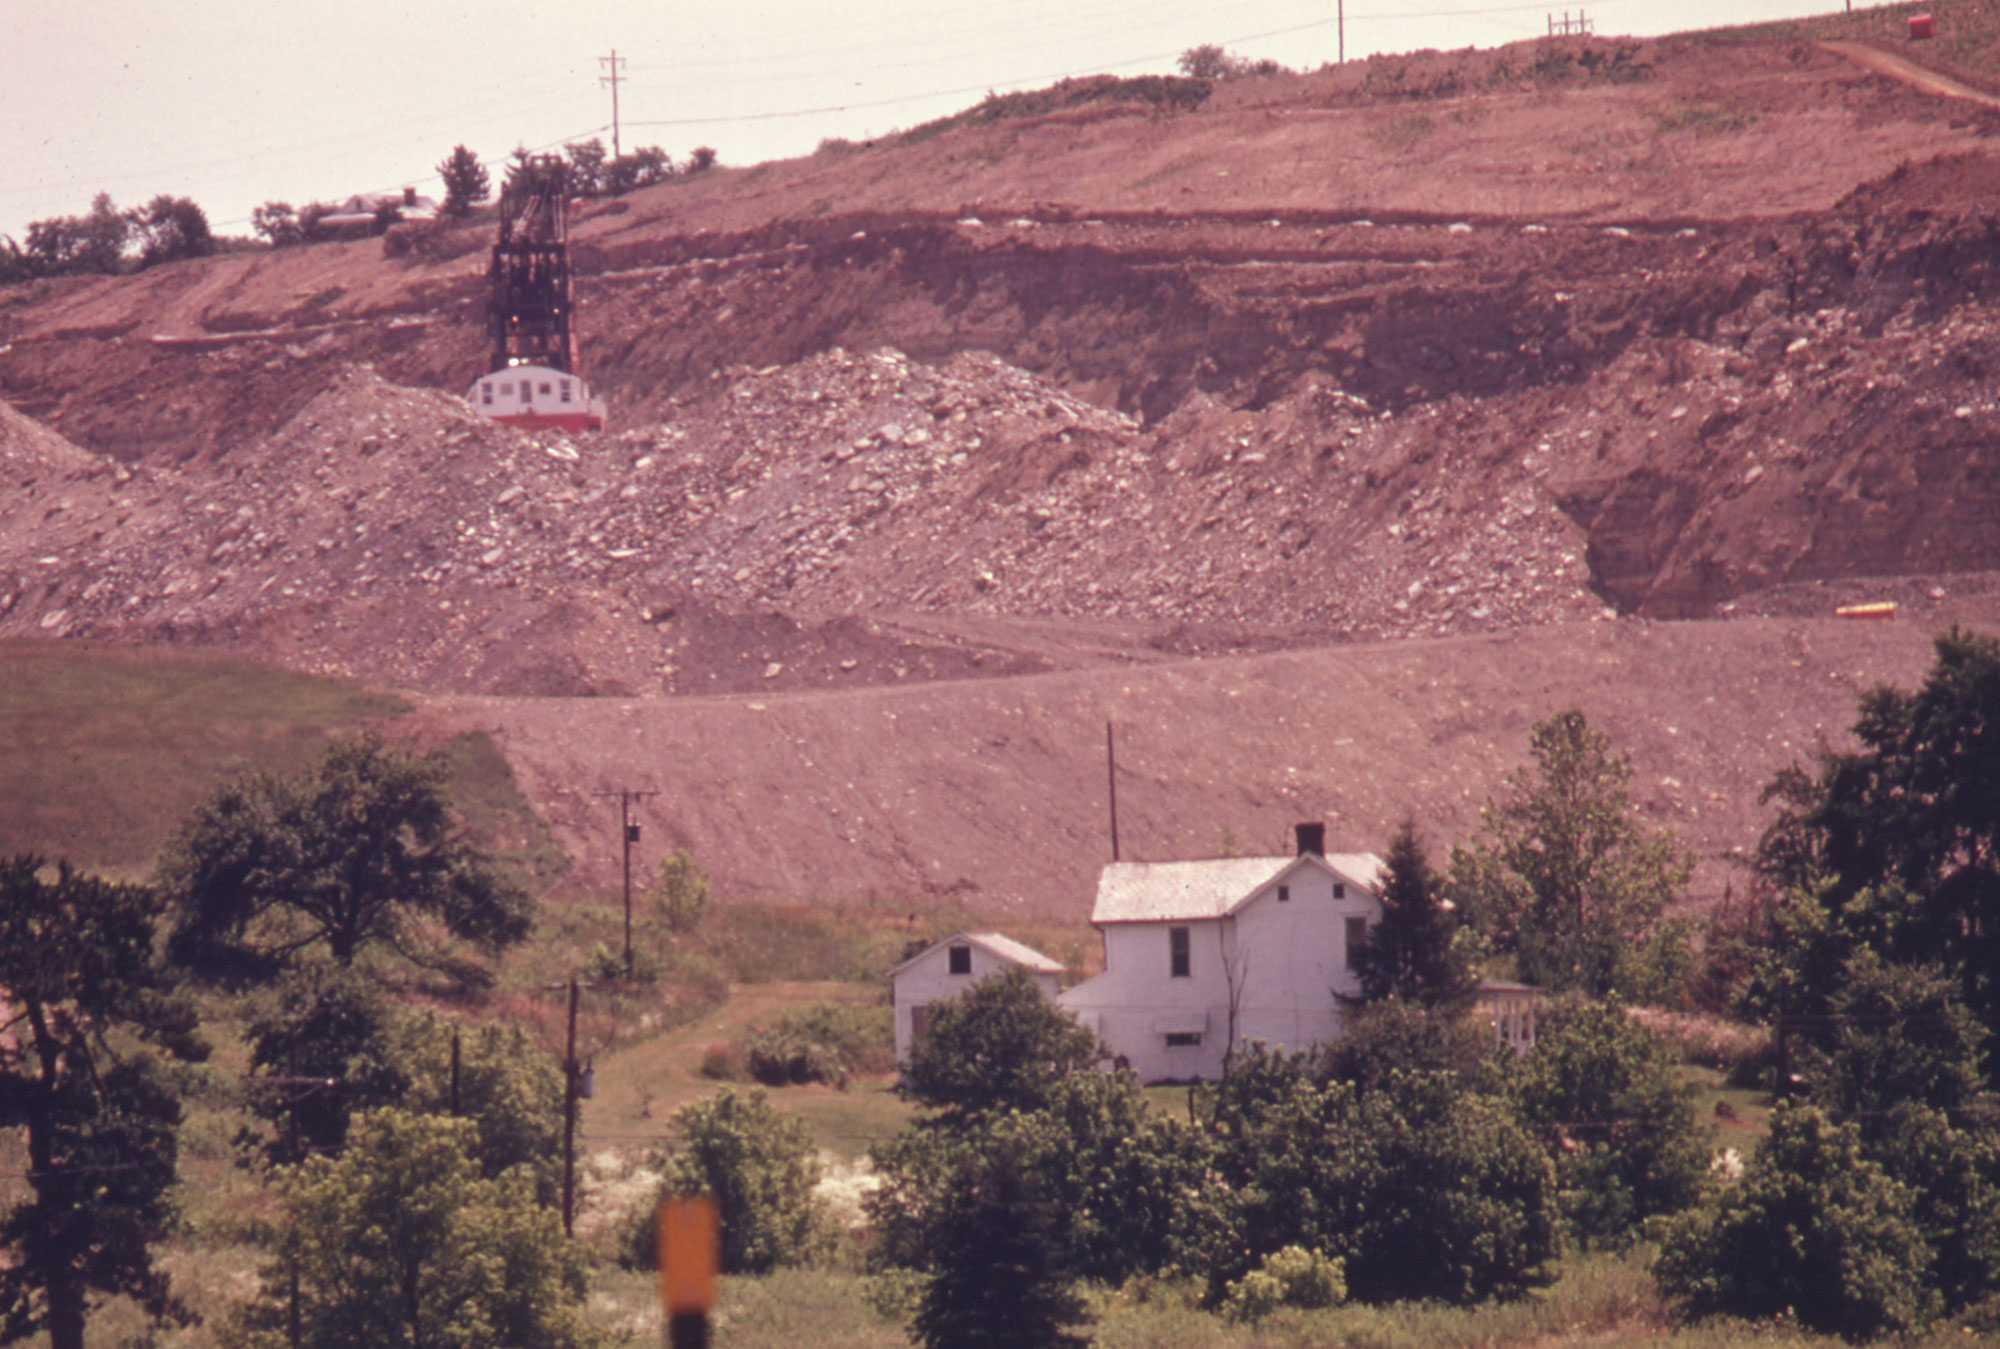 Photograph of a strip mining operation in Ohio in 1974. The photo shows a white house amongst trees in the foreground. A hill rises behind the house in the background. The hill is being excavated by a dragline, which is behind and above the house at the upper left of the image. Large piles of earth can be seen between the house and the dragline.